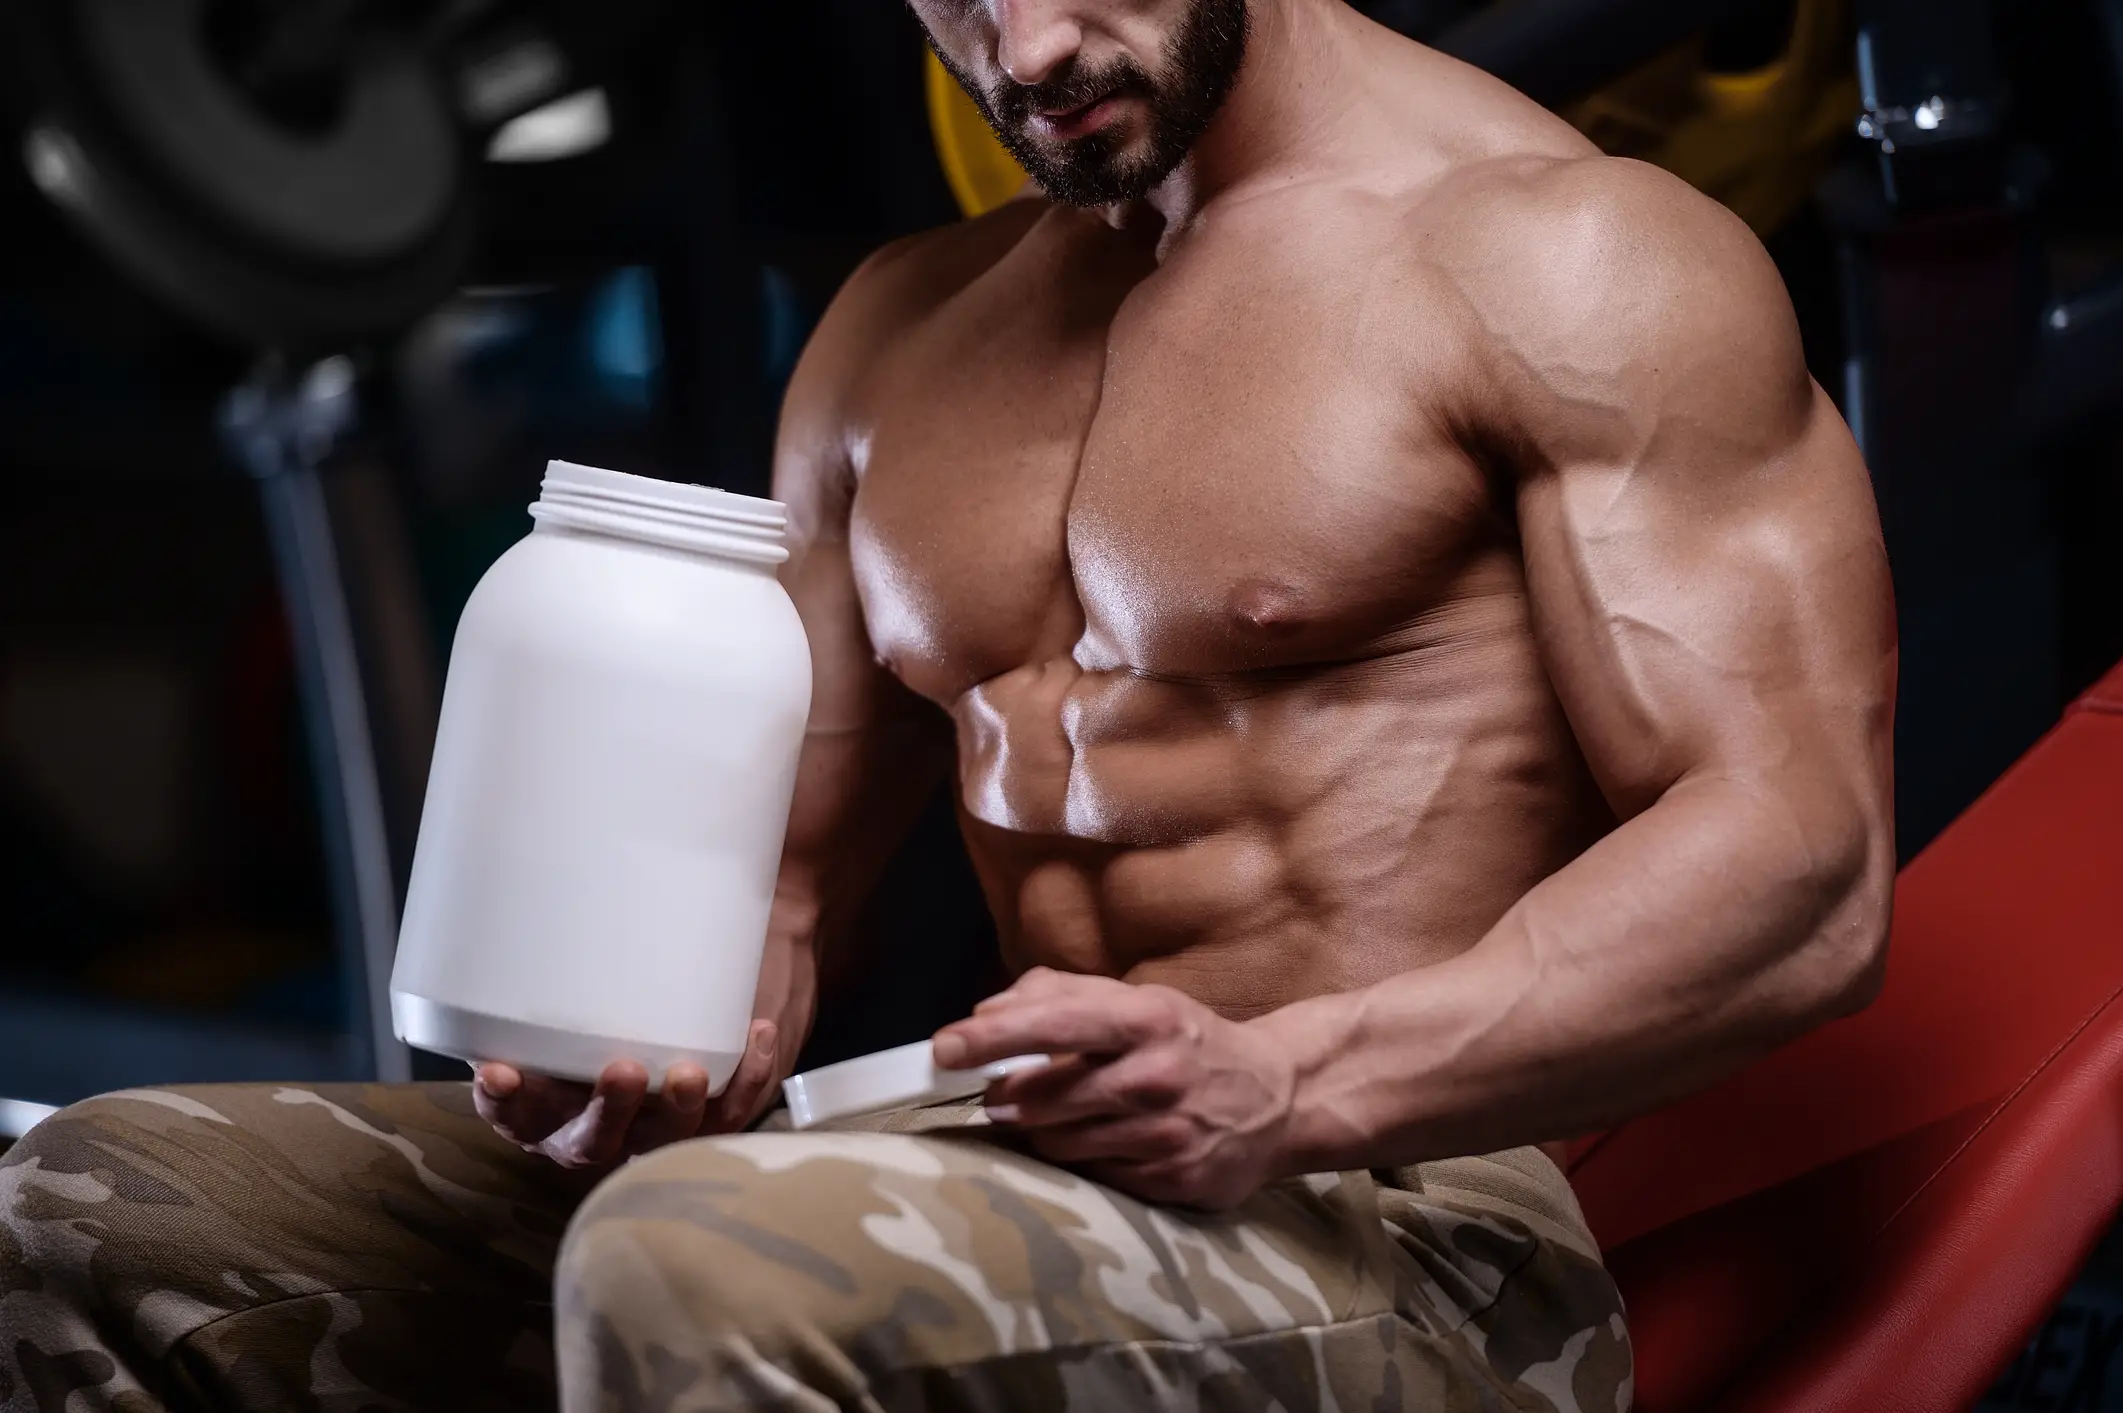 Man using supplements to enhance and benefit his training